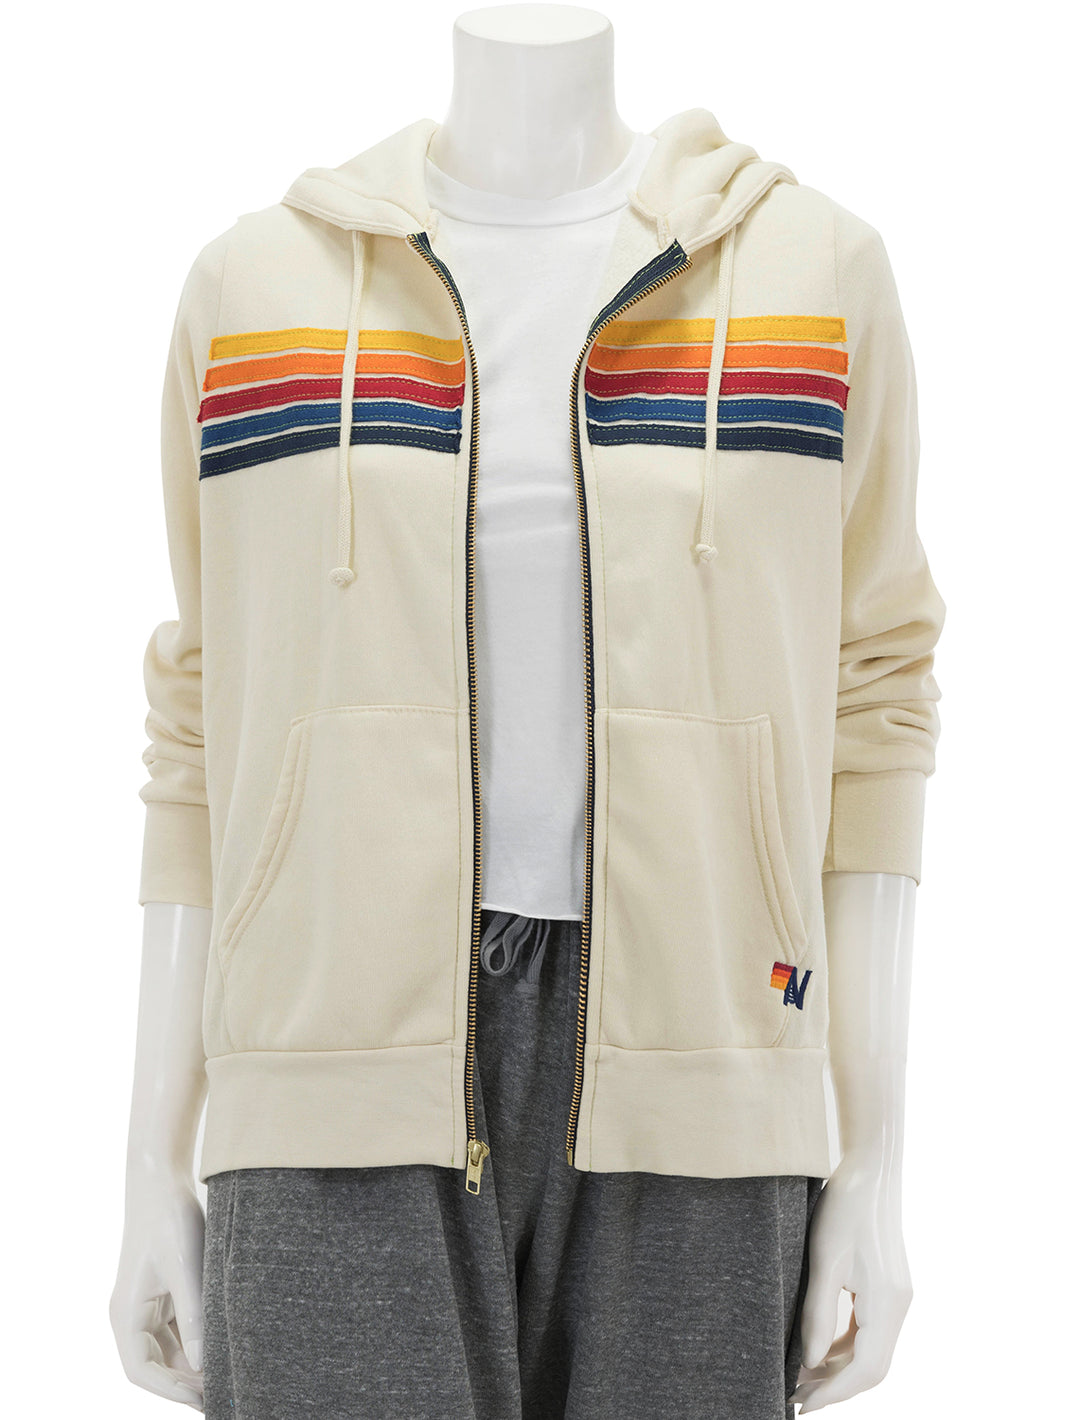 Front view of Aviator Nation's 5 stripe zip hoodie in vintage white, unzipped.